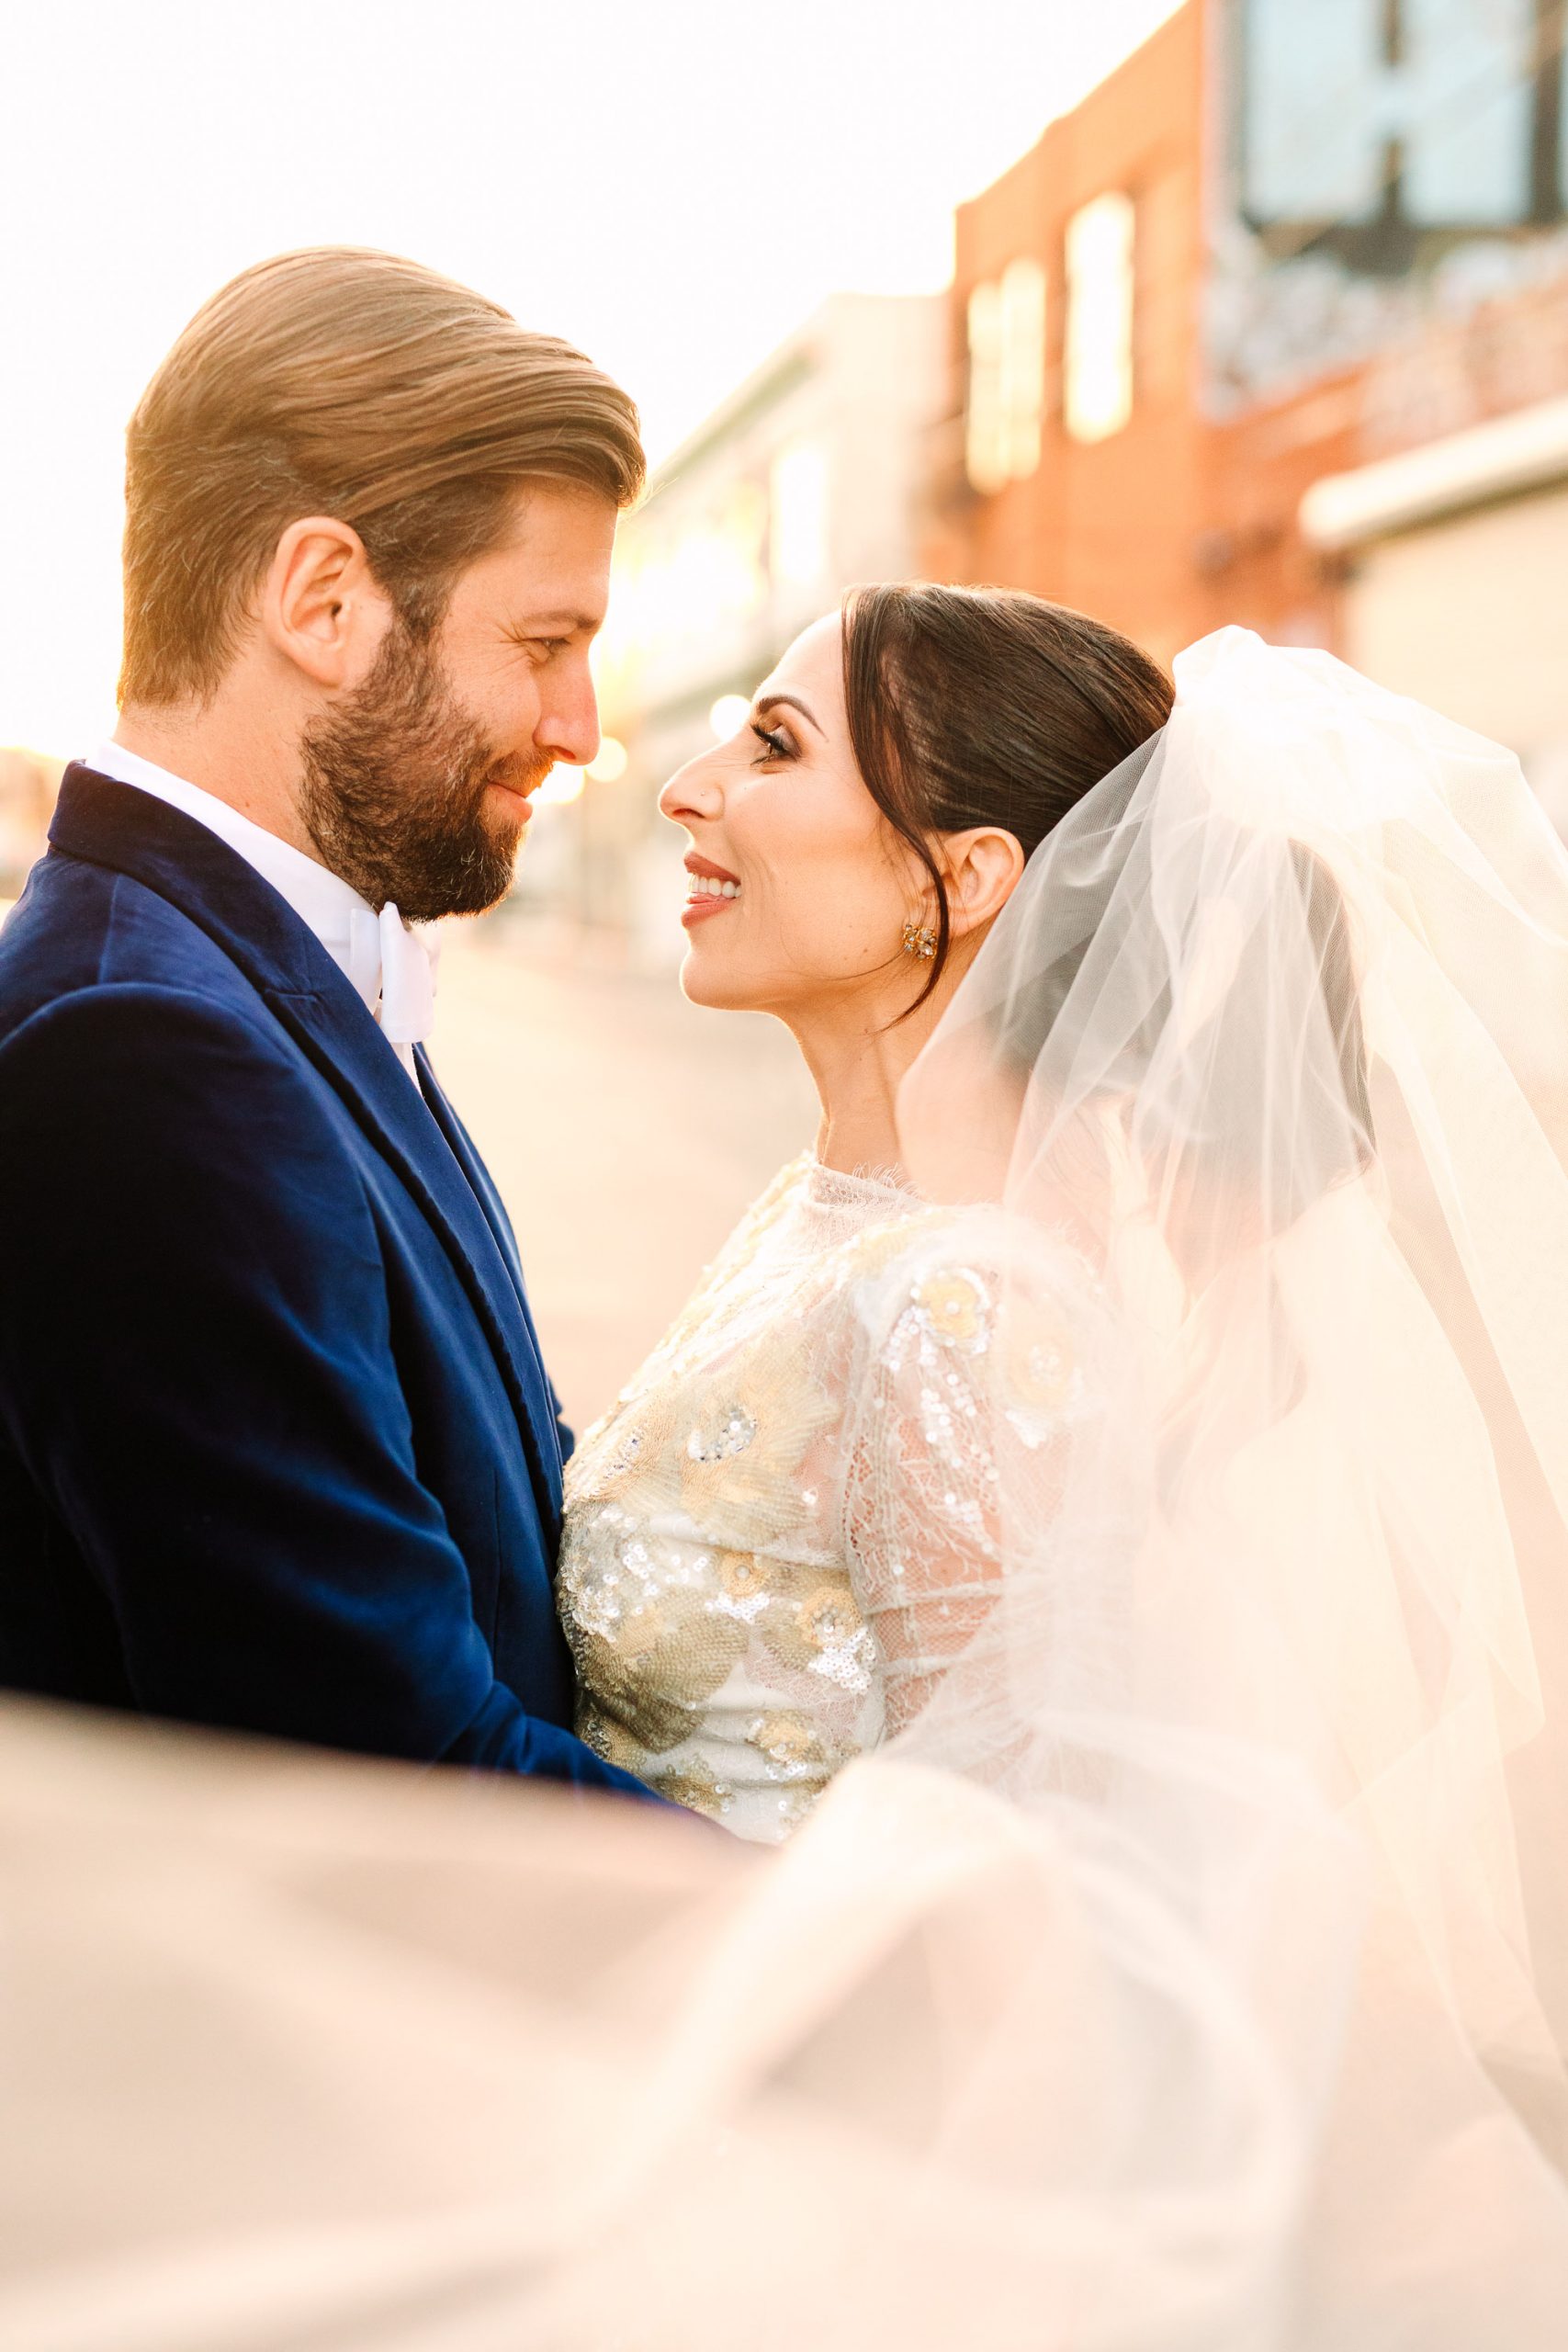 Wedding portrait with veil by Mary Costa Photography